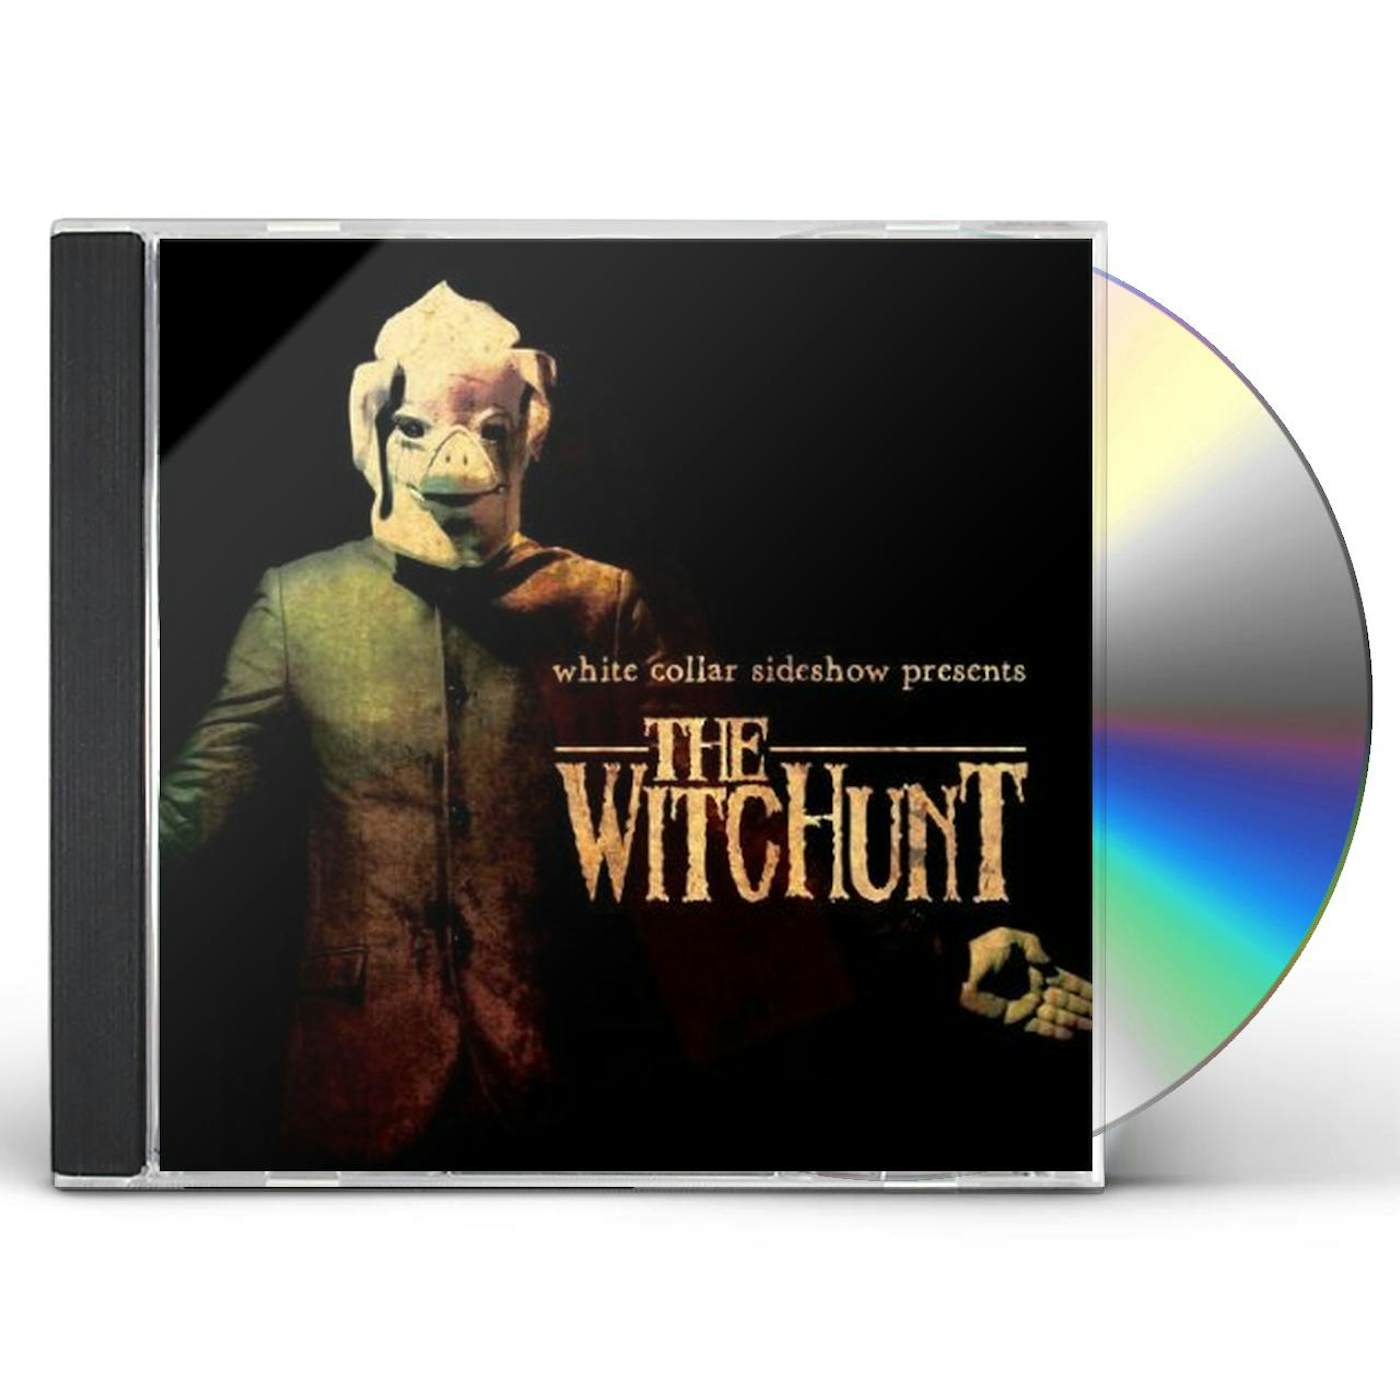 White Collar Sideshow WITCHUNT CD